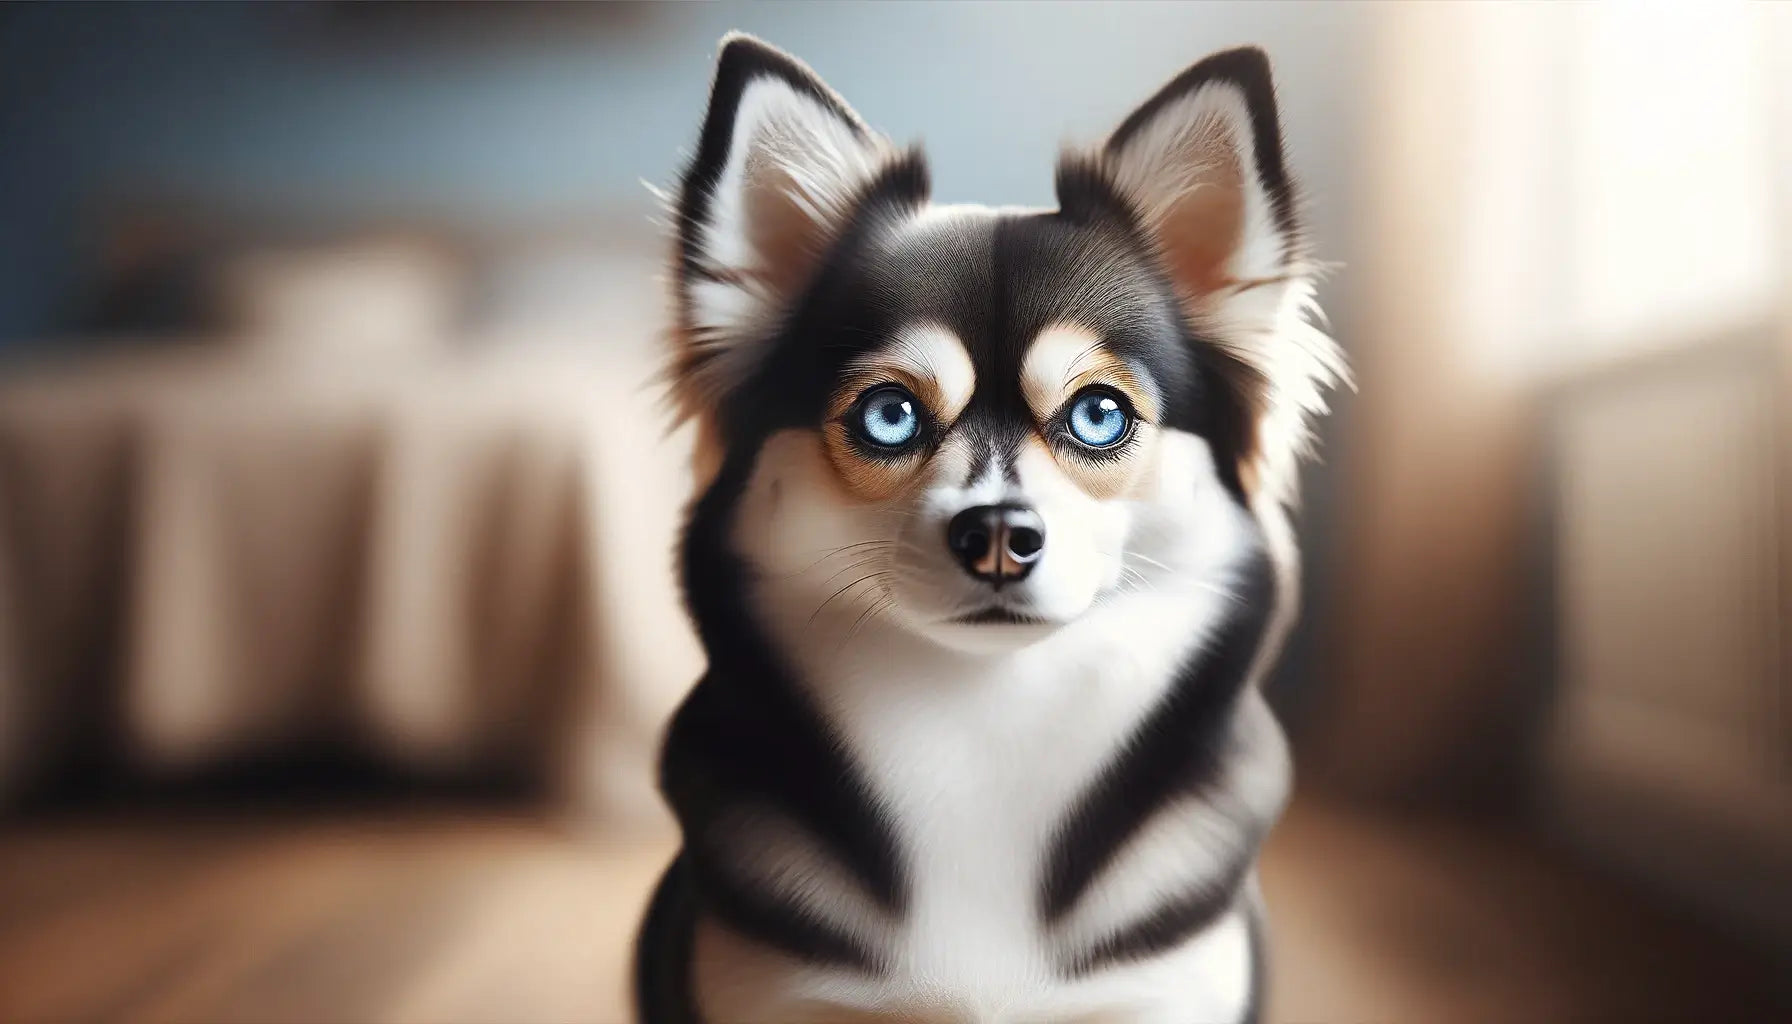 A Chihuahua Husky Mix sitting calmly, showcasing bright blue eyes and a sharp contrast in its fur color, embodying the mixed breed lineage.